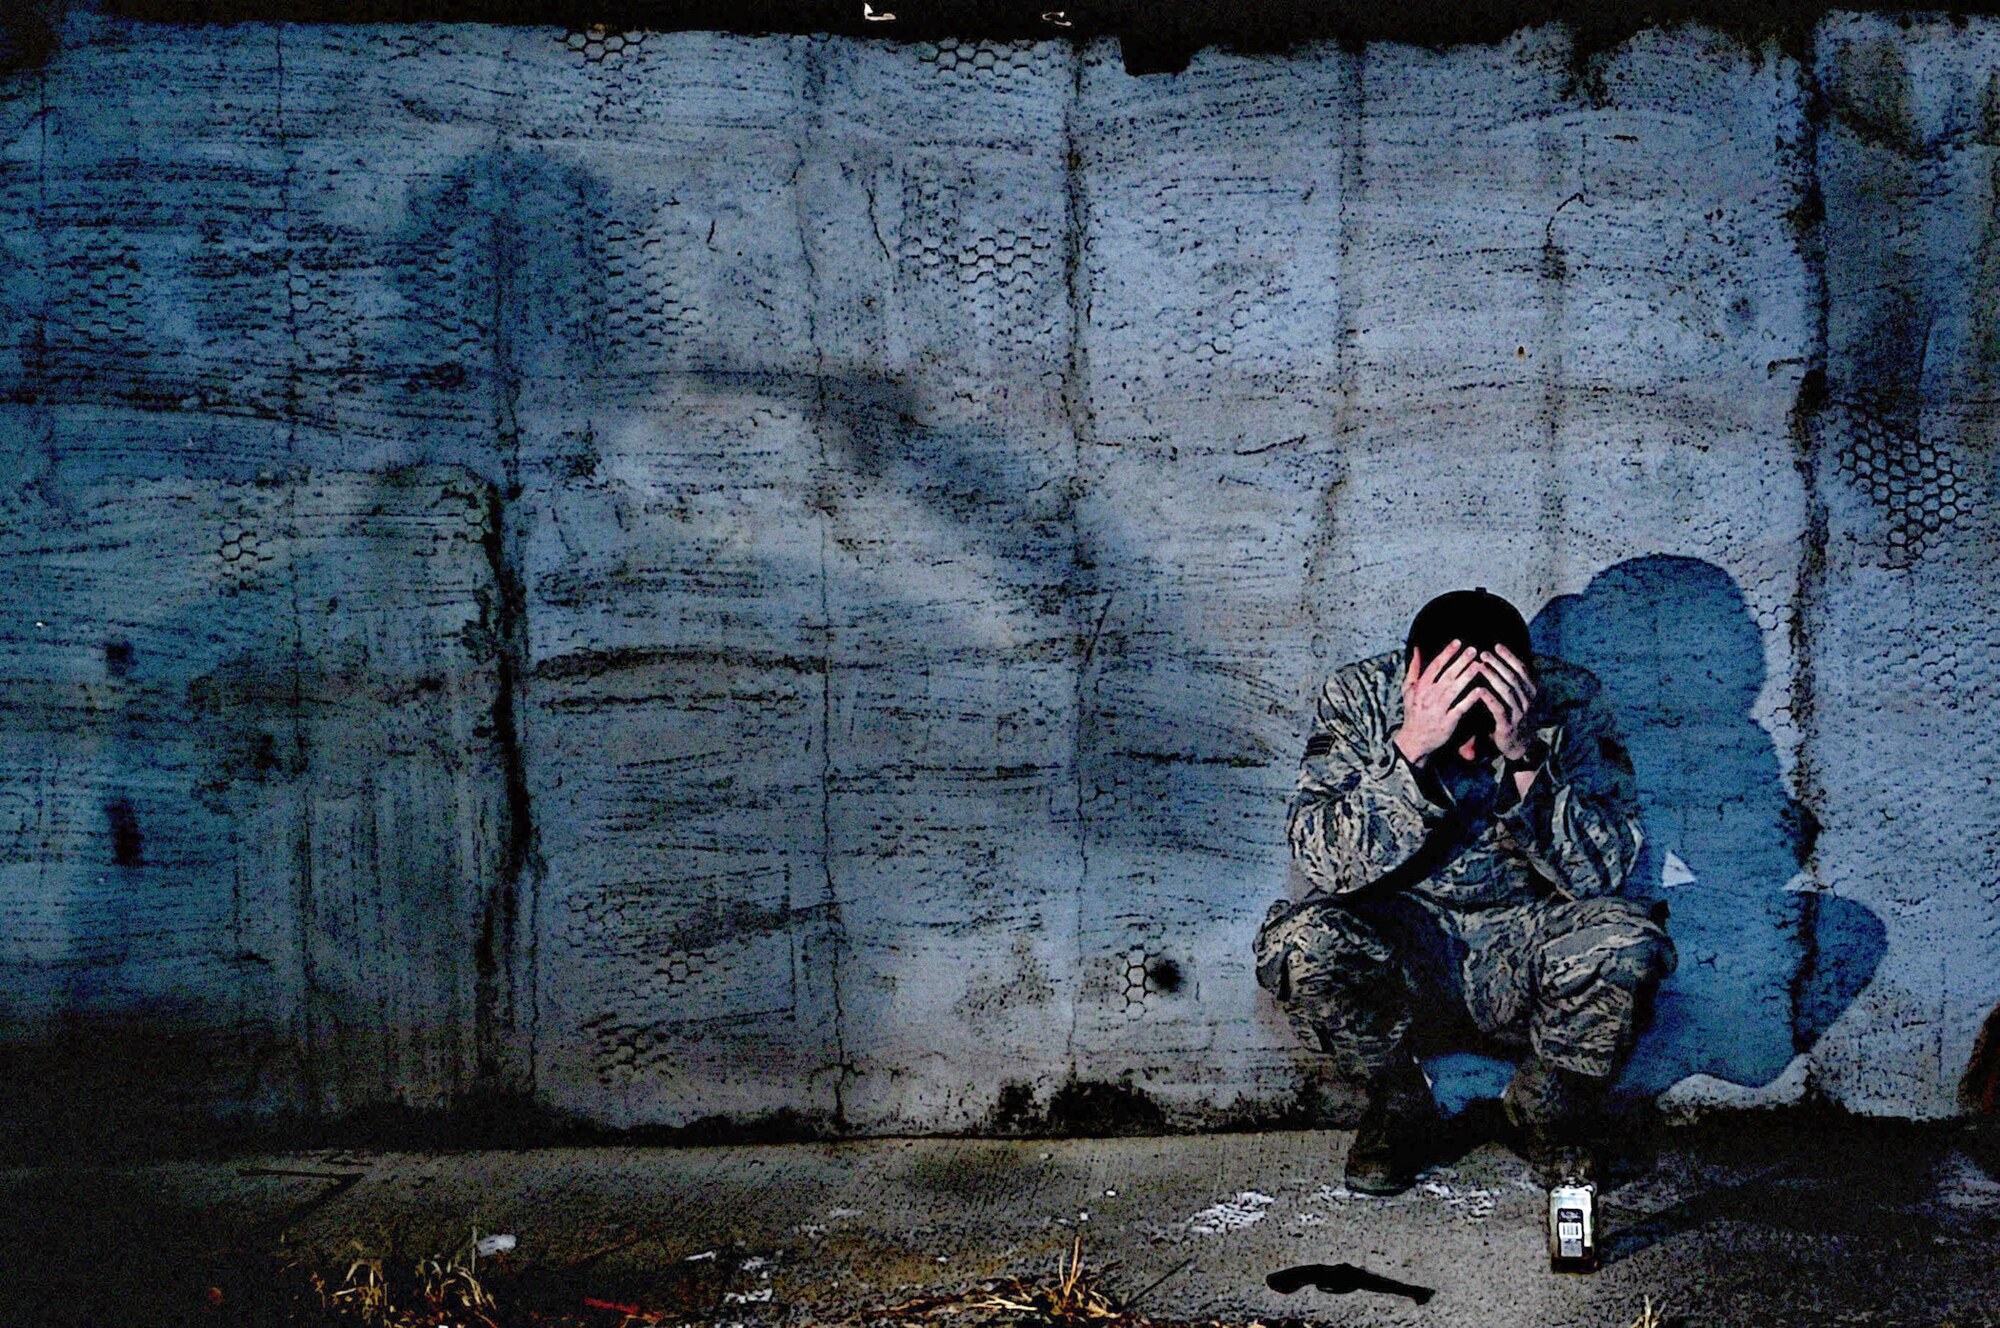 Airmen who are struggling with their mental health are encouraged to seek help by utilizing a helping agency. If in an emergency or crisis, call the Military Crisis Line at 1-800-273-8255 and press 1. To make an appointment with the mental health clinic, call 719-526-2273. (U.S. Air Force illustration by Airman 1st Class Corey Hook)